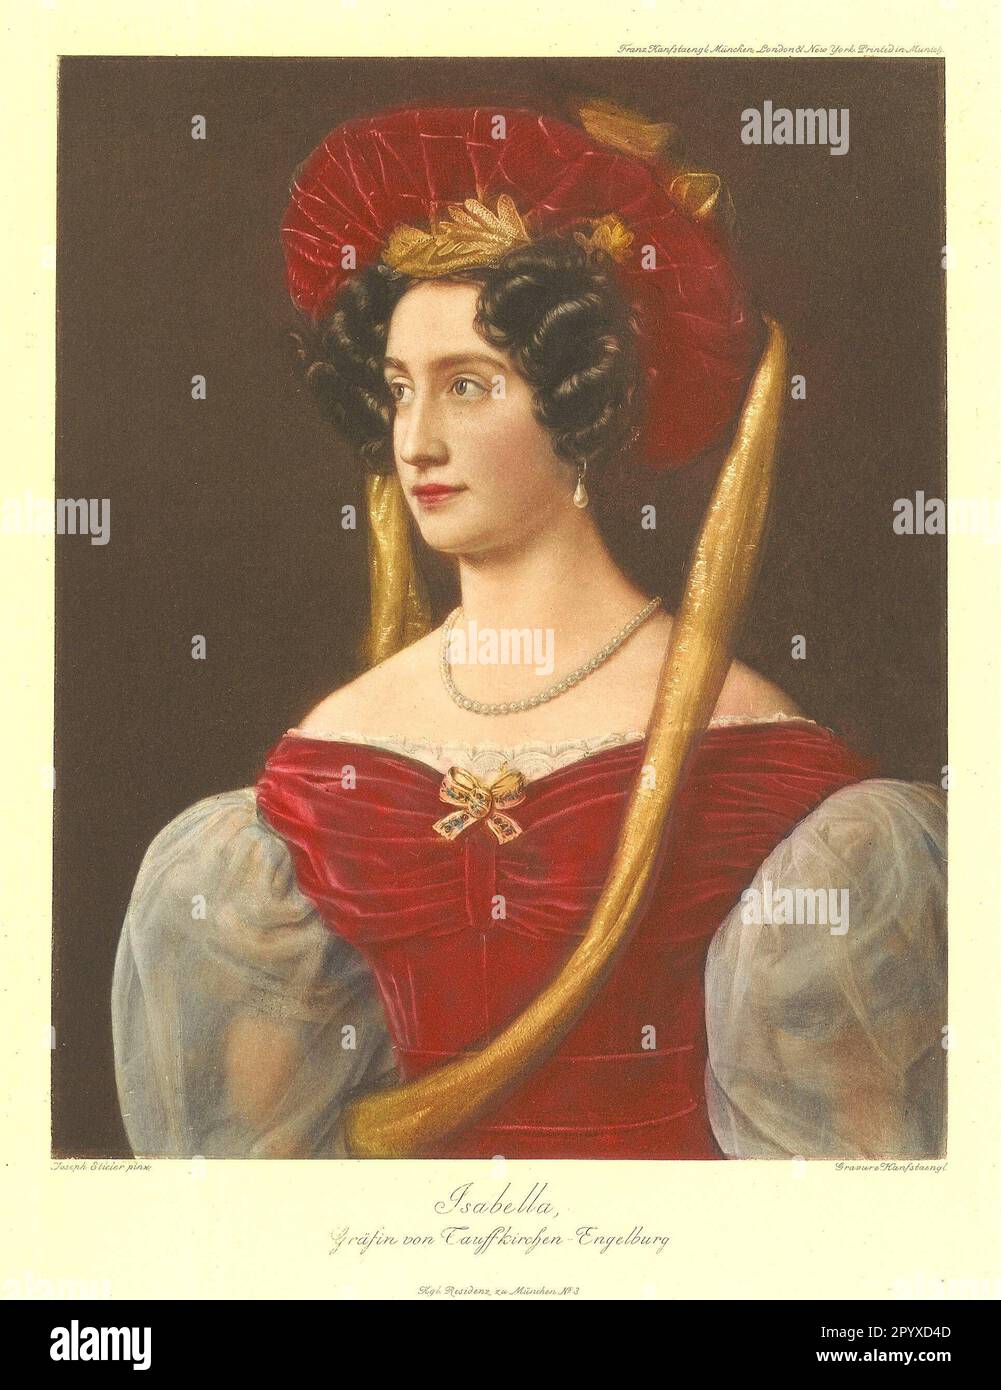 Isabella Countess of Tauffkirchen-Engelburg, German noblewoman. Painting by Joseph Stieler. Between 1827 and 1850, Stieler painted a total of 36 portrait portraits of beautiful women for King Ludwig I's beauty gallery in Nymphenburg Palace. Photo: Heliogravure, Corpus Imaginum, Hanfstaengl Collection.nnnnnnnn [automated translation] Stock Photo